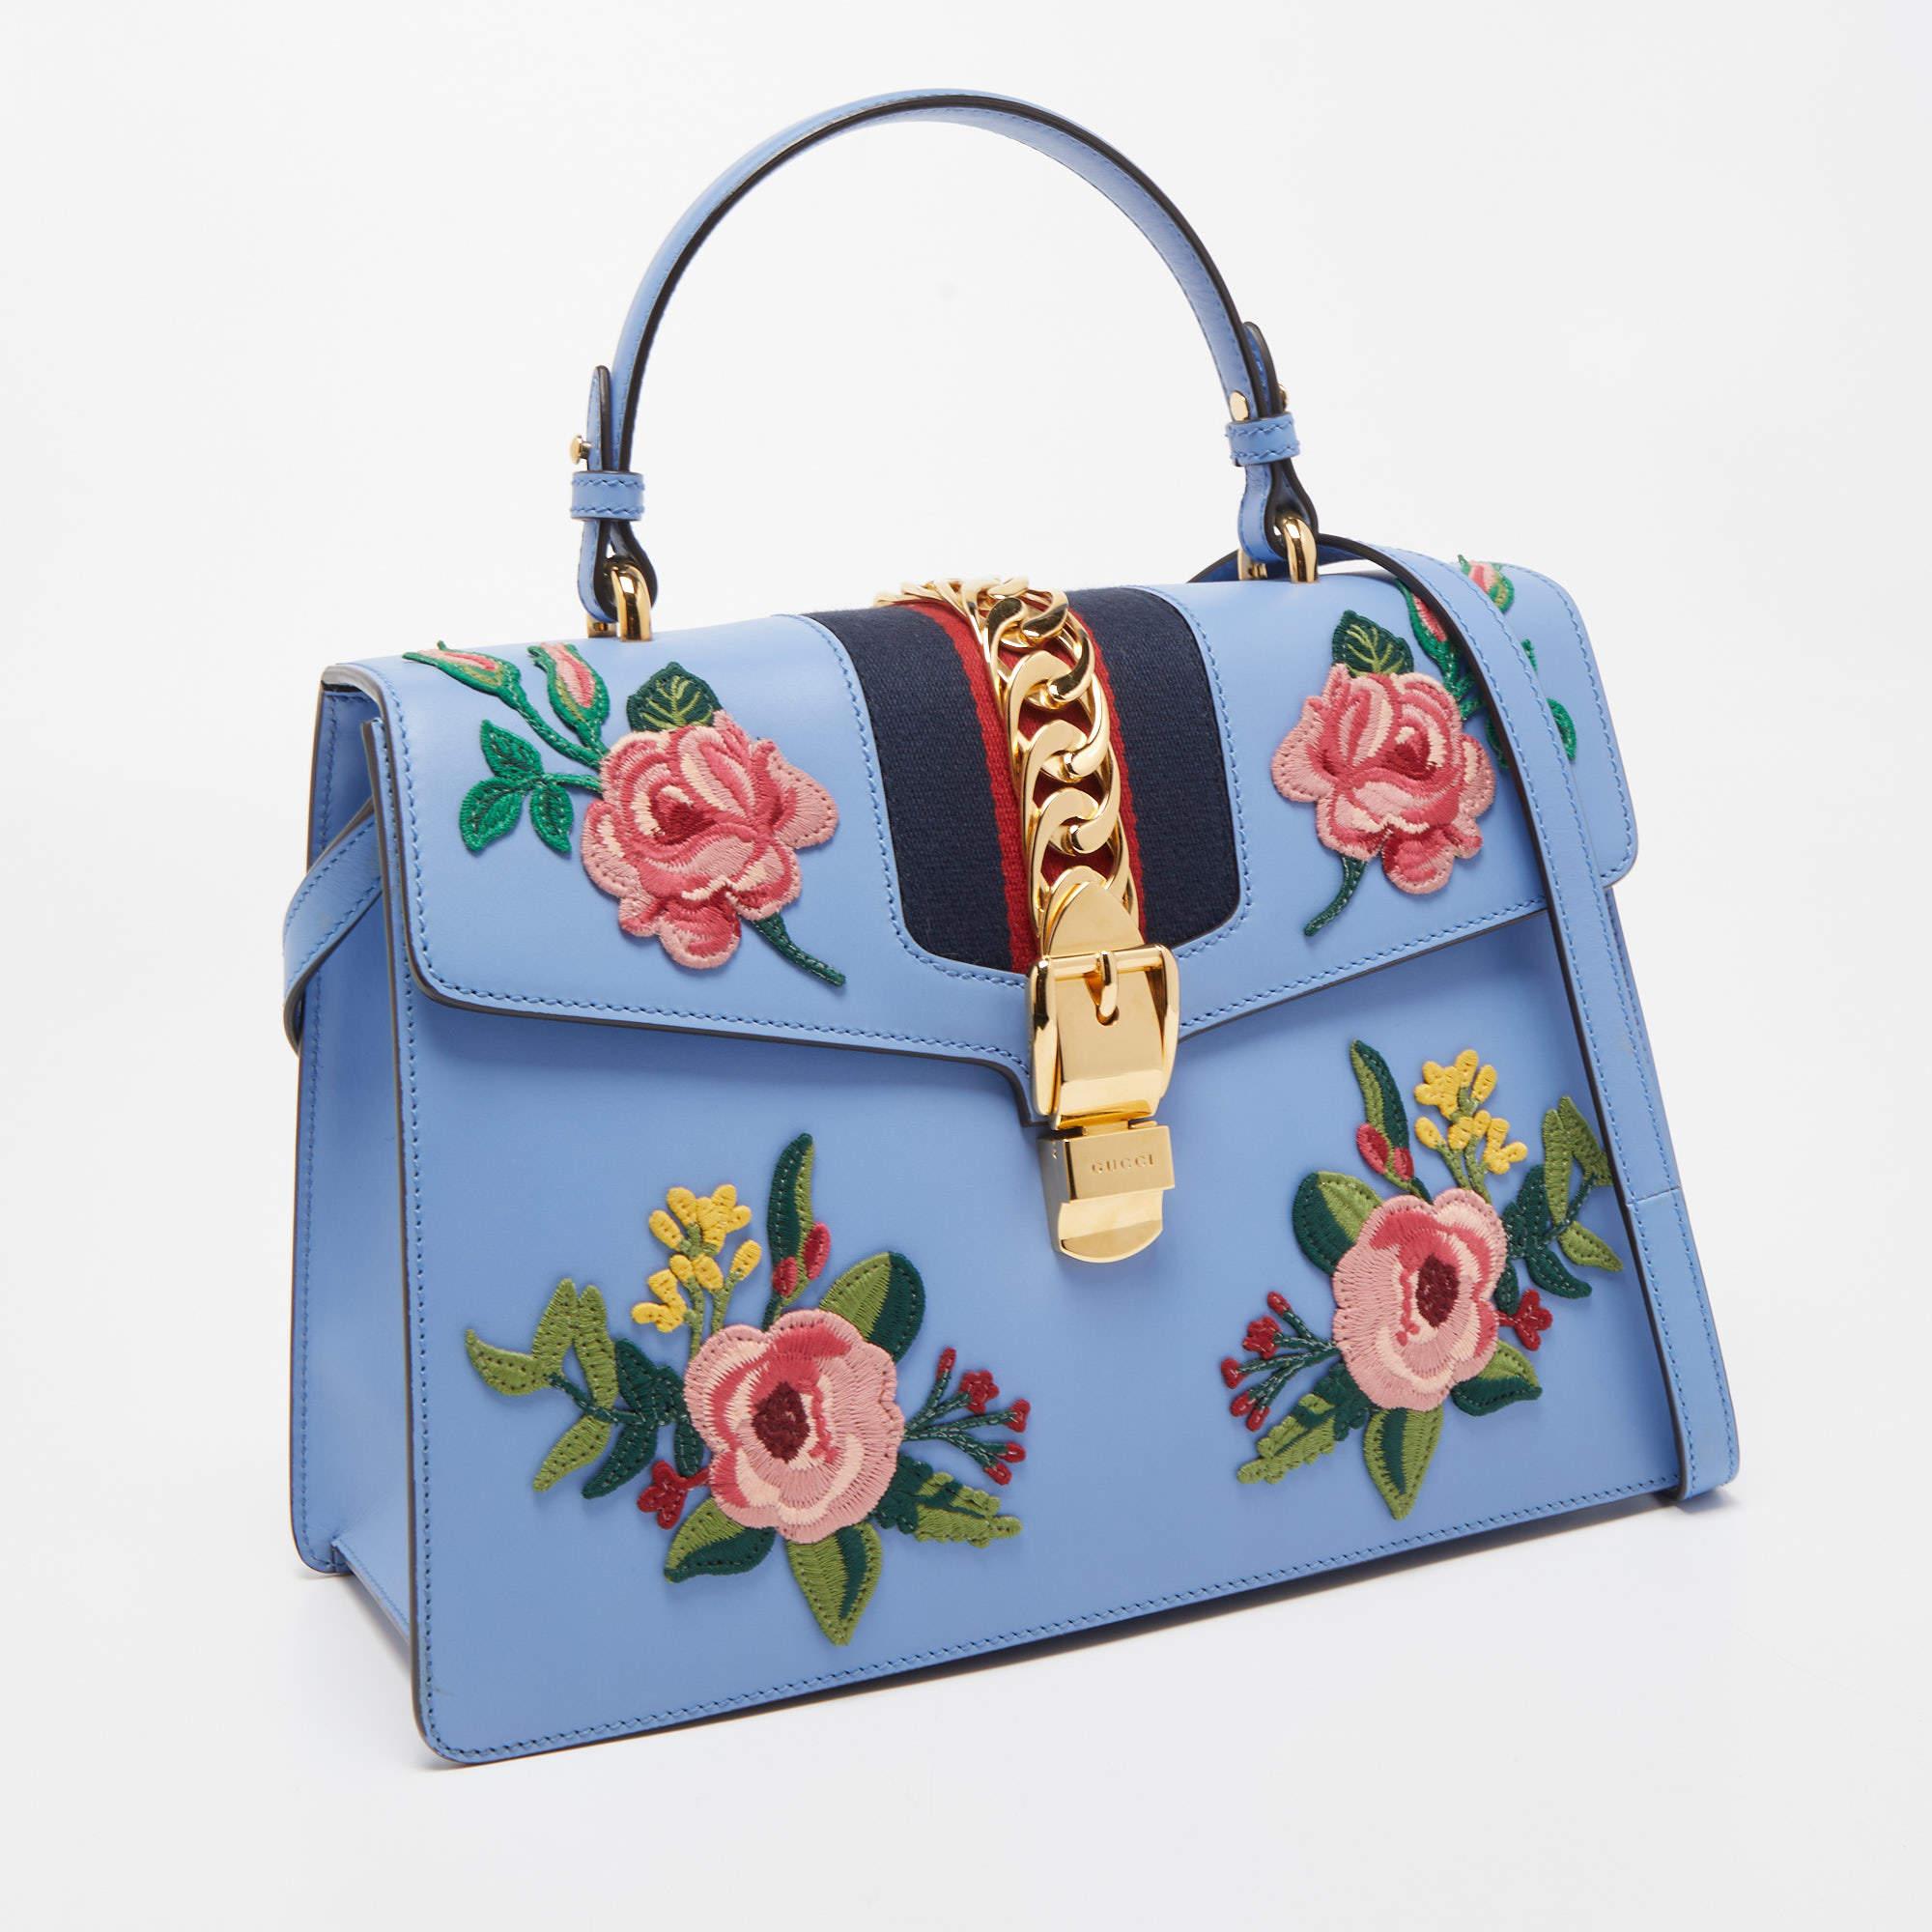 Gucci Light Blue Floral Embroidered Leather Medium Sylvie Top Handle Bag 1